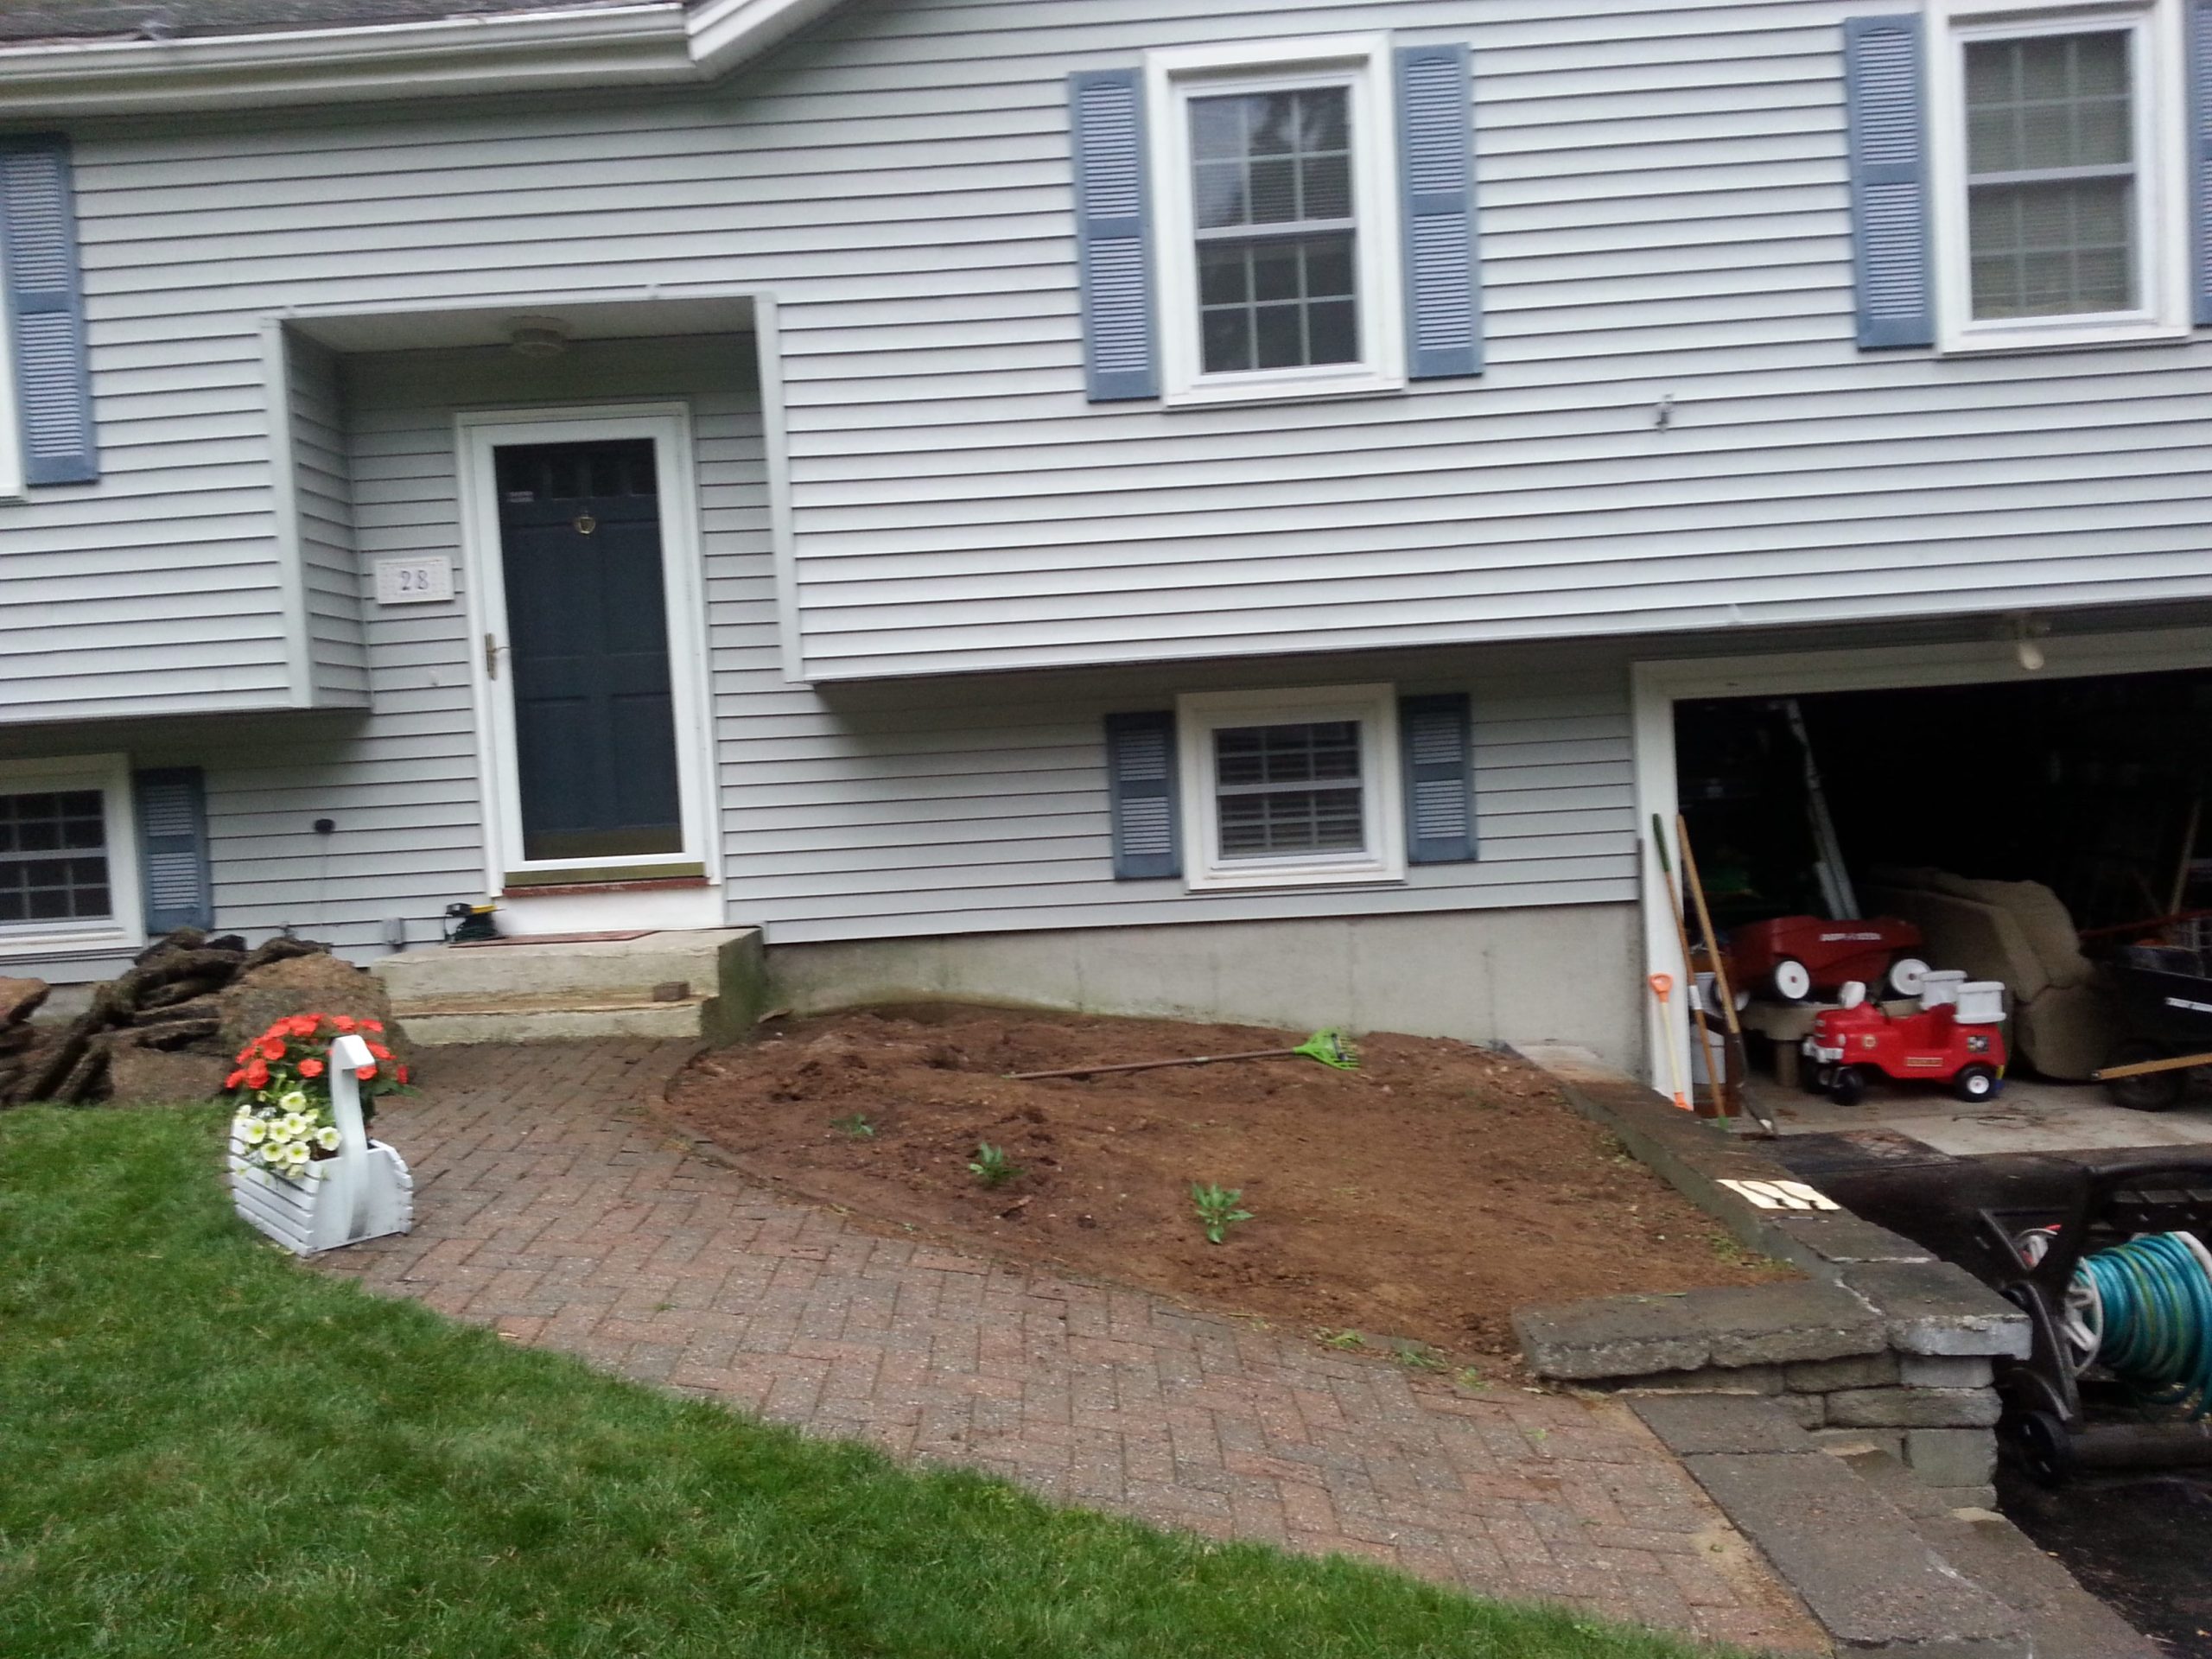 20150718 140500 scaled | front yard renovations